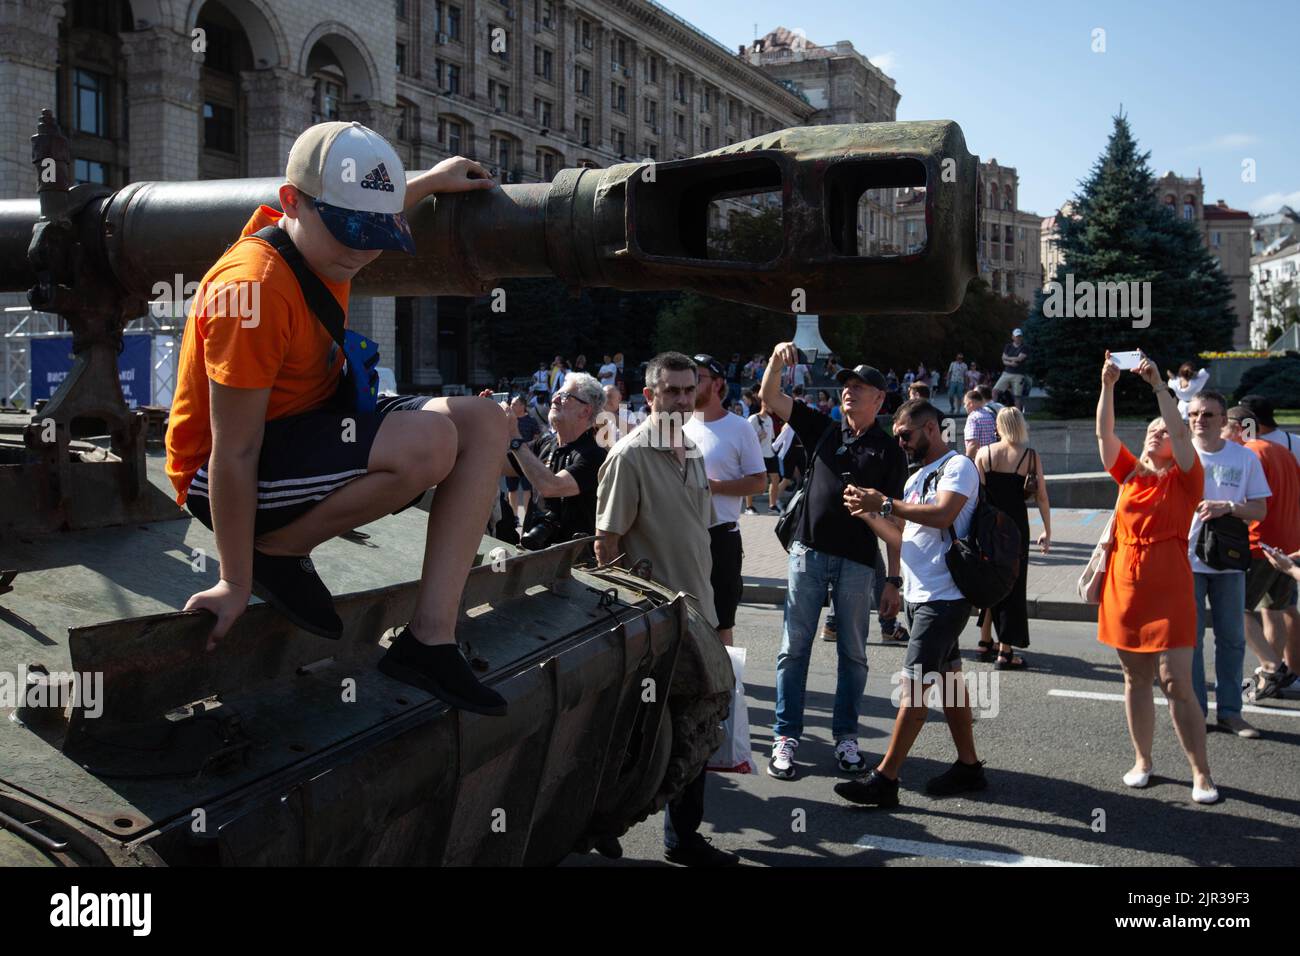 A boy plays on a destroyed Russian tank displayed on the main street Khreshchatyk as part of the upcoming celebration of the Independence Day of Ukraine amid Russia's invasion of Ukraine in central Kyiv. Stock Photo